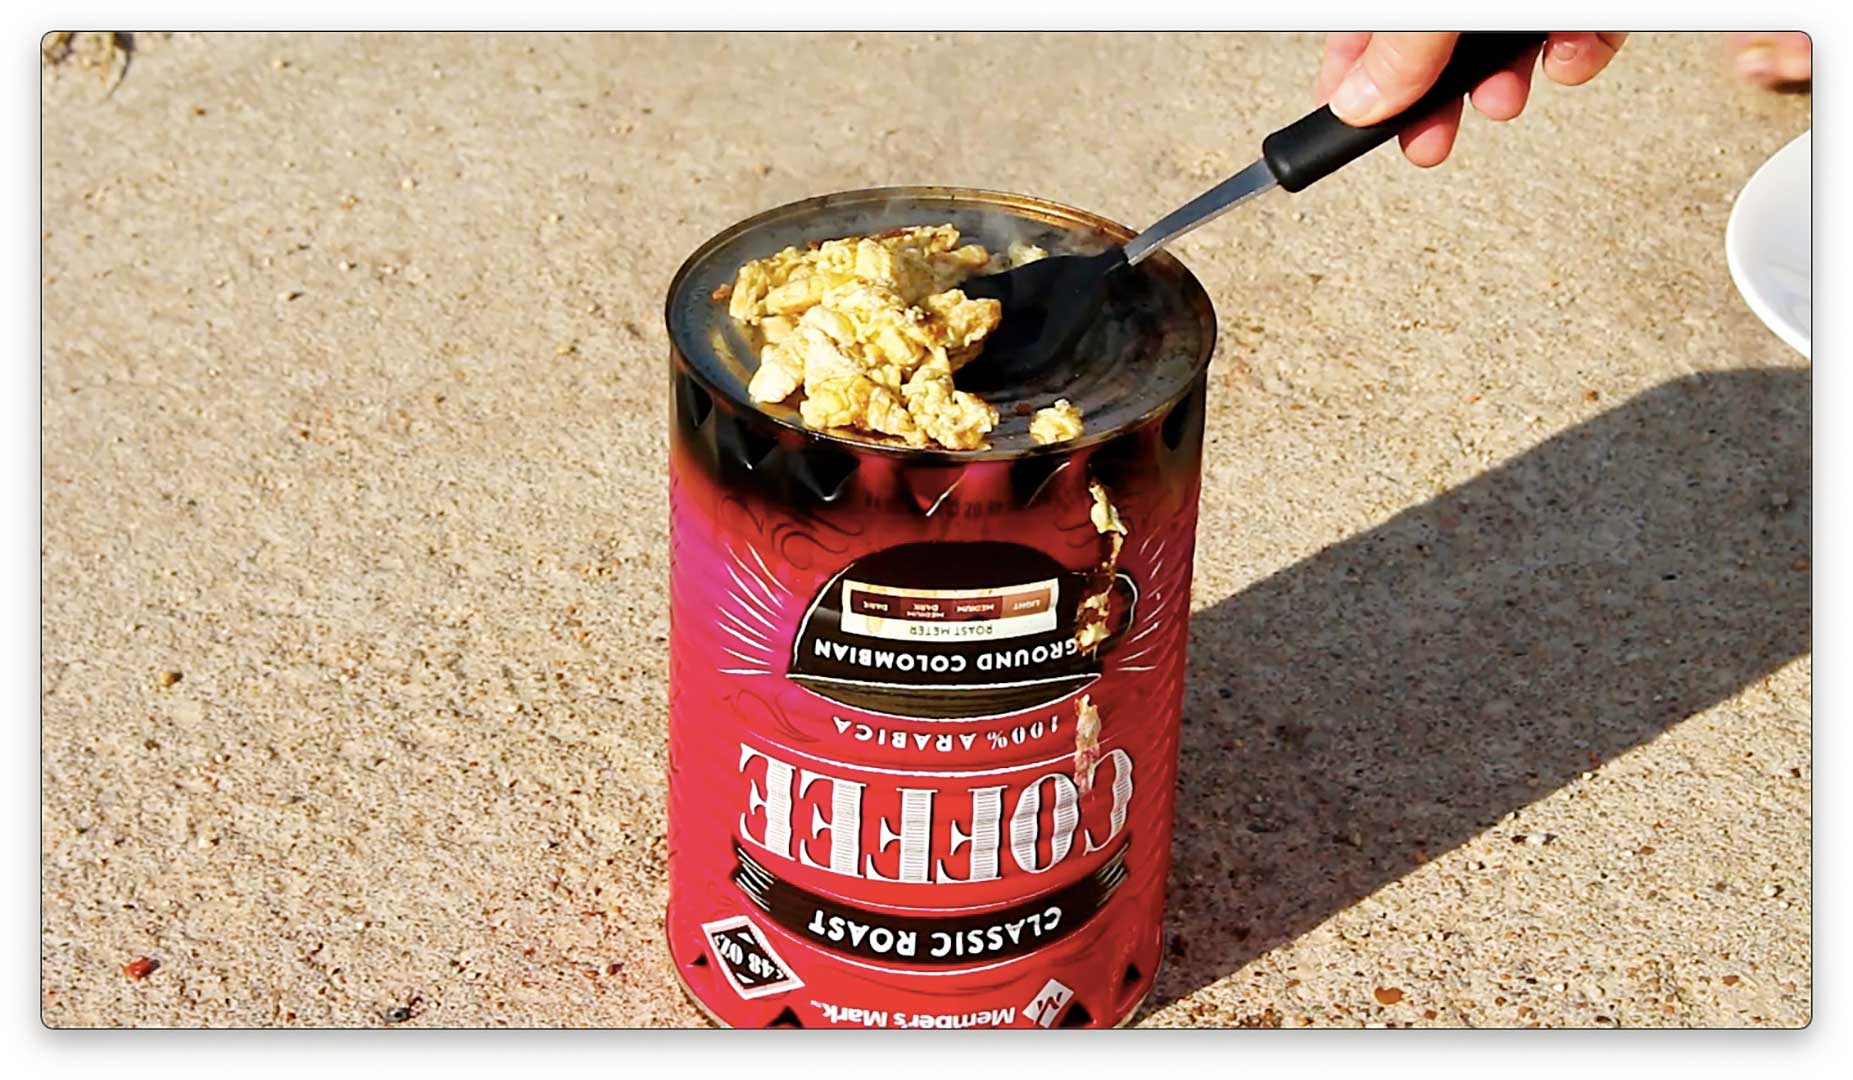 Off-the-Grid Cooking Hack: Make a Tin Can Stove and Buddy Burner